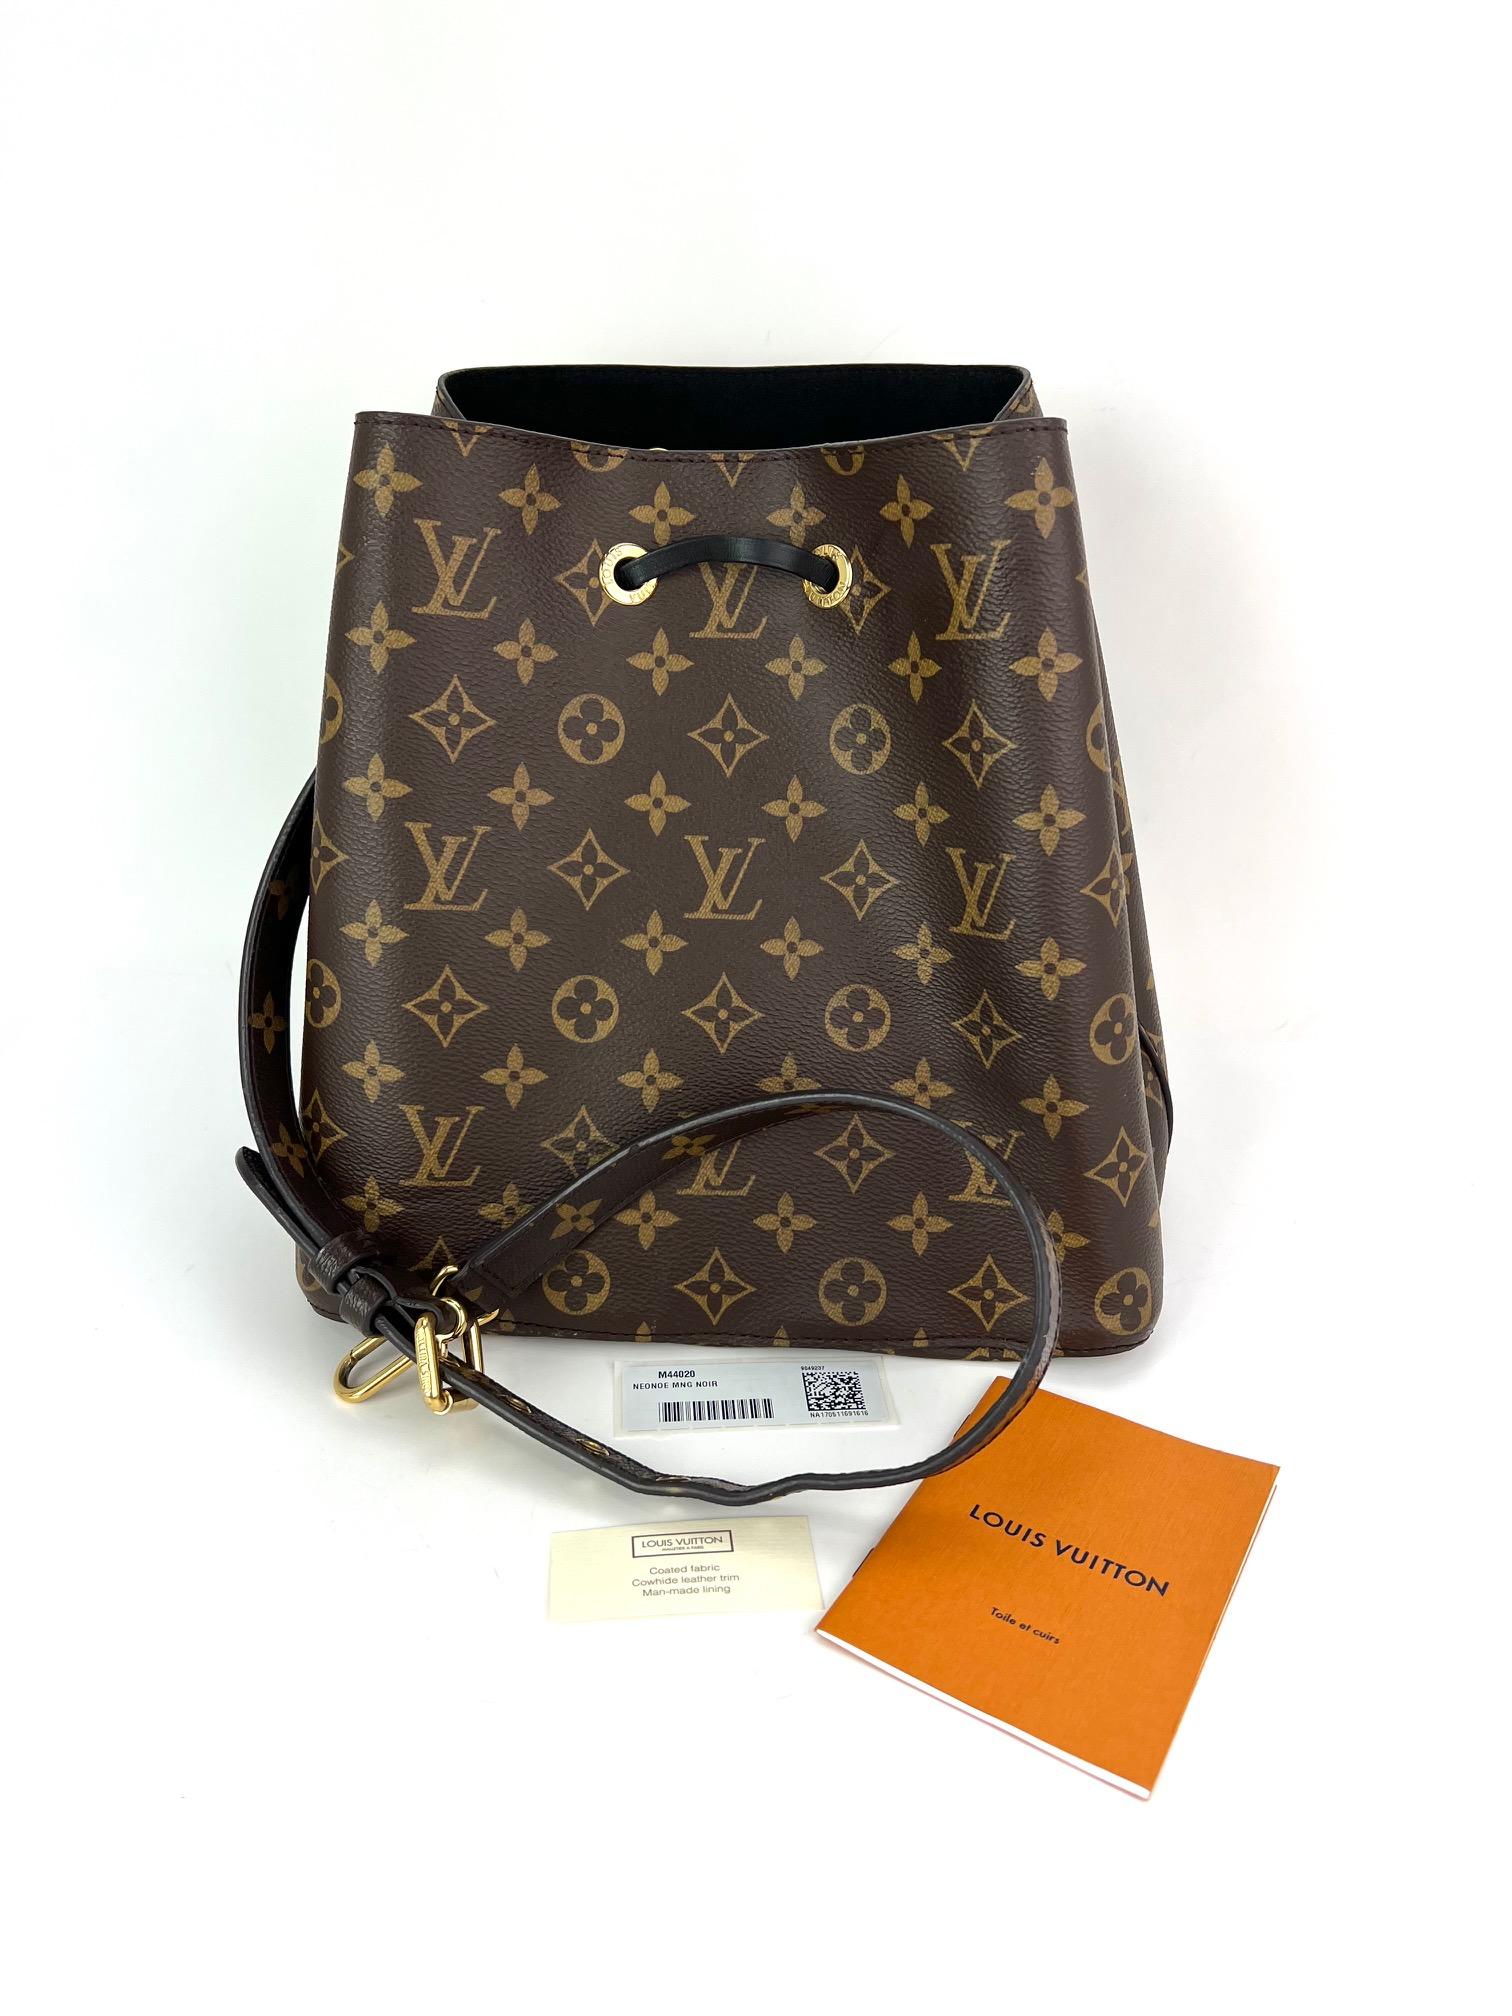 Pre-Owned  100% Authentic
LOUIS VUITTON NeoNoe MM Monogram Black 
Drawstring Satchel
RATING: A...excellent, near mint, only
slight signs of wear
MATERIAL: monogram canvas, leather trim
STRAP: monogram, adjustable, has a little bend
DROP: 11.5'' to